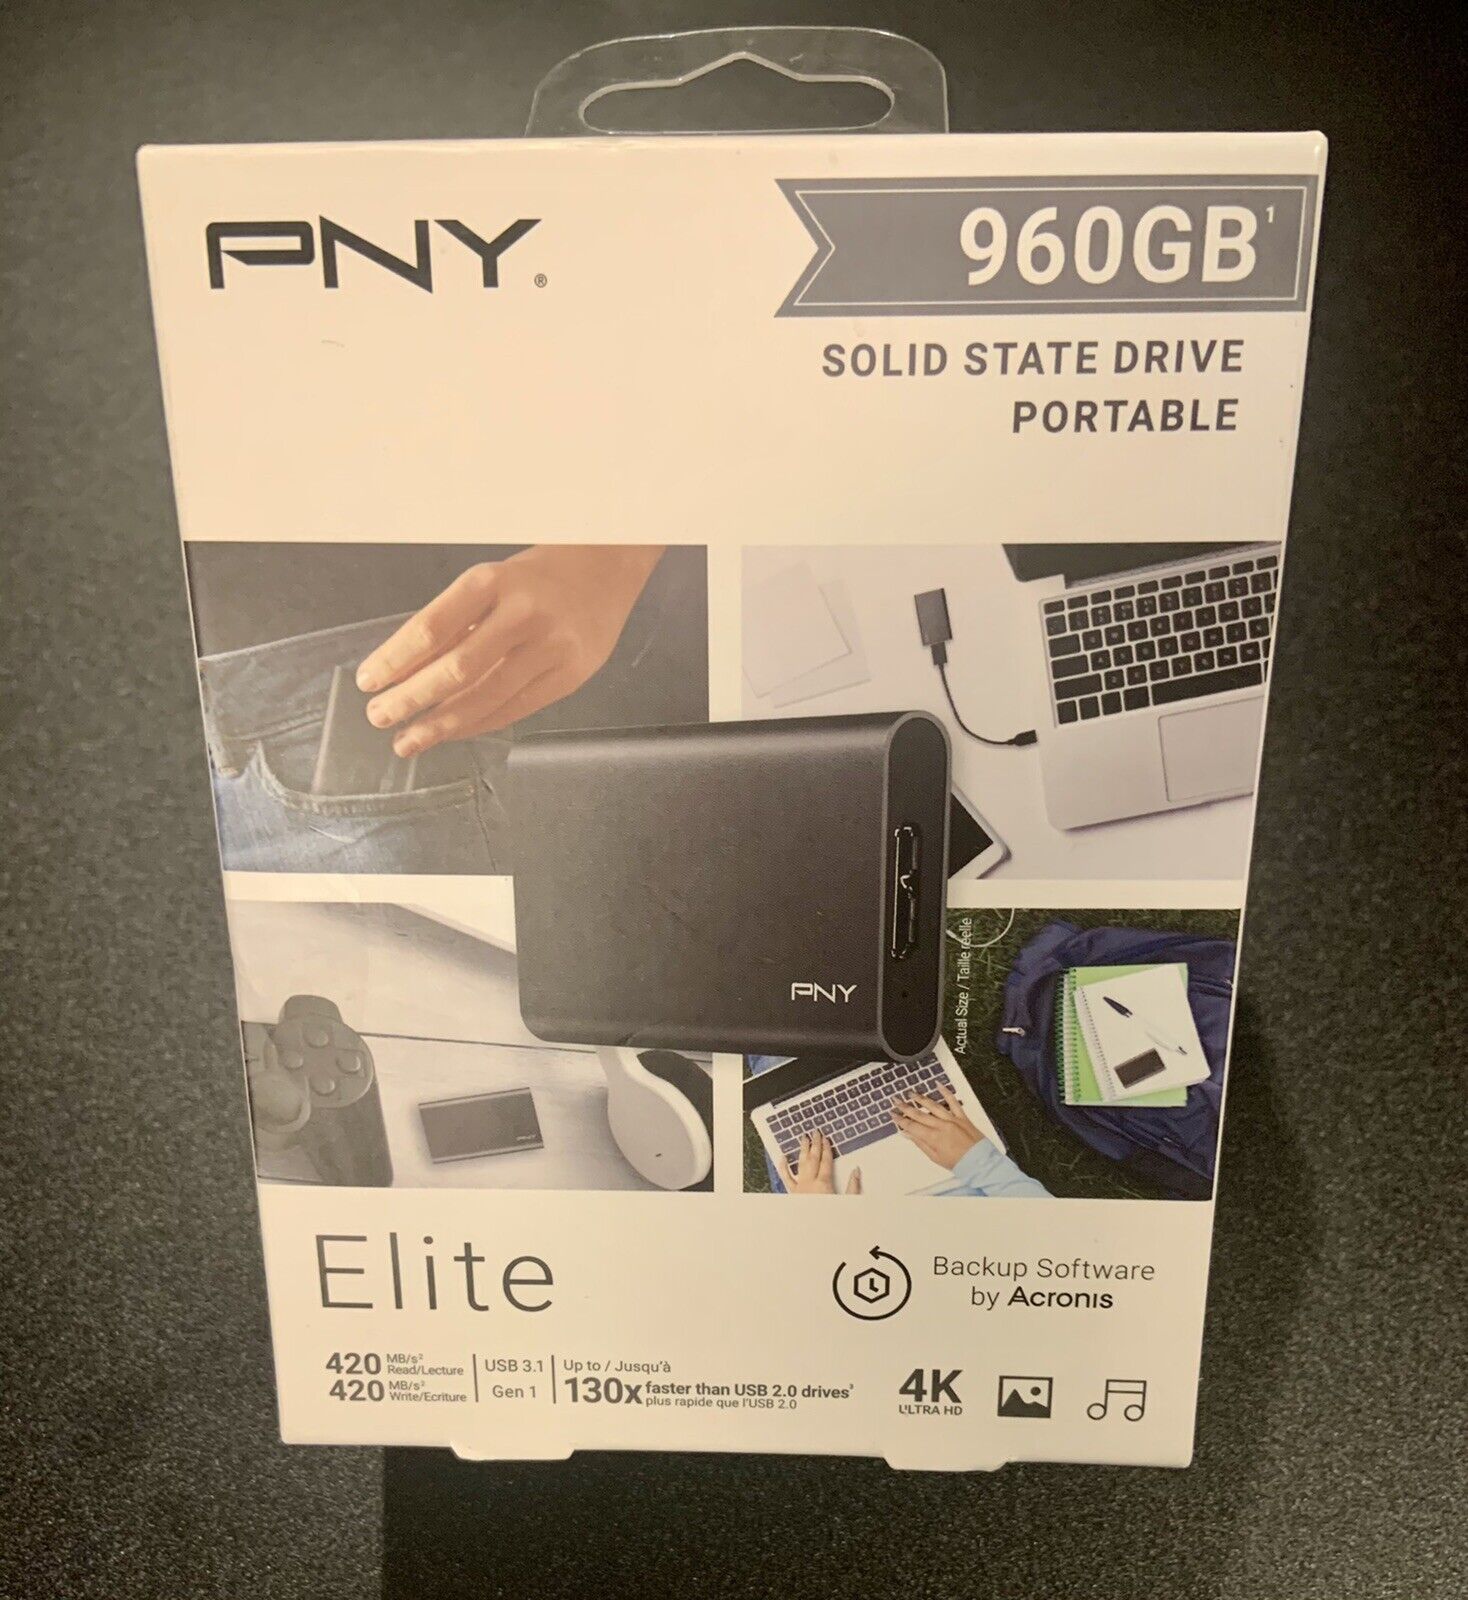 PNY Elite 960 GB External 1.4 inch (PSD1CS1050960RB) Solid State Drive